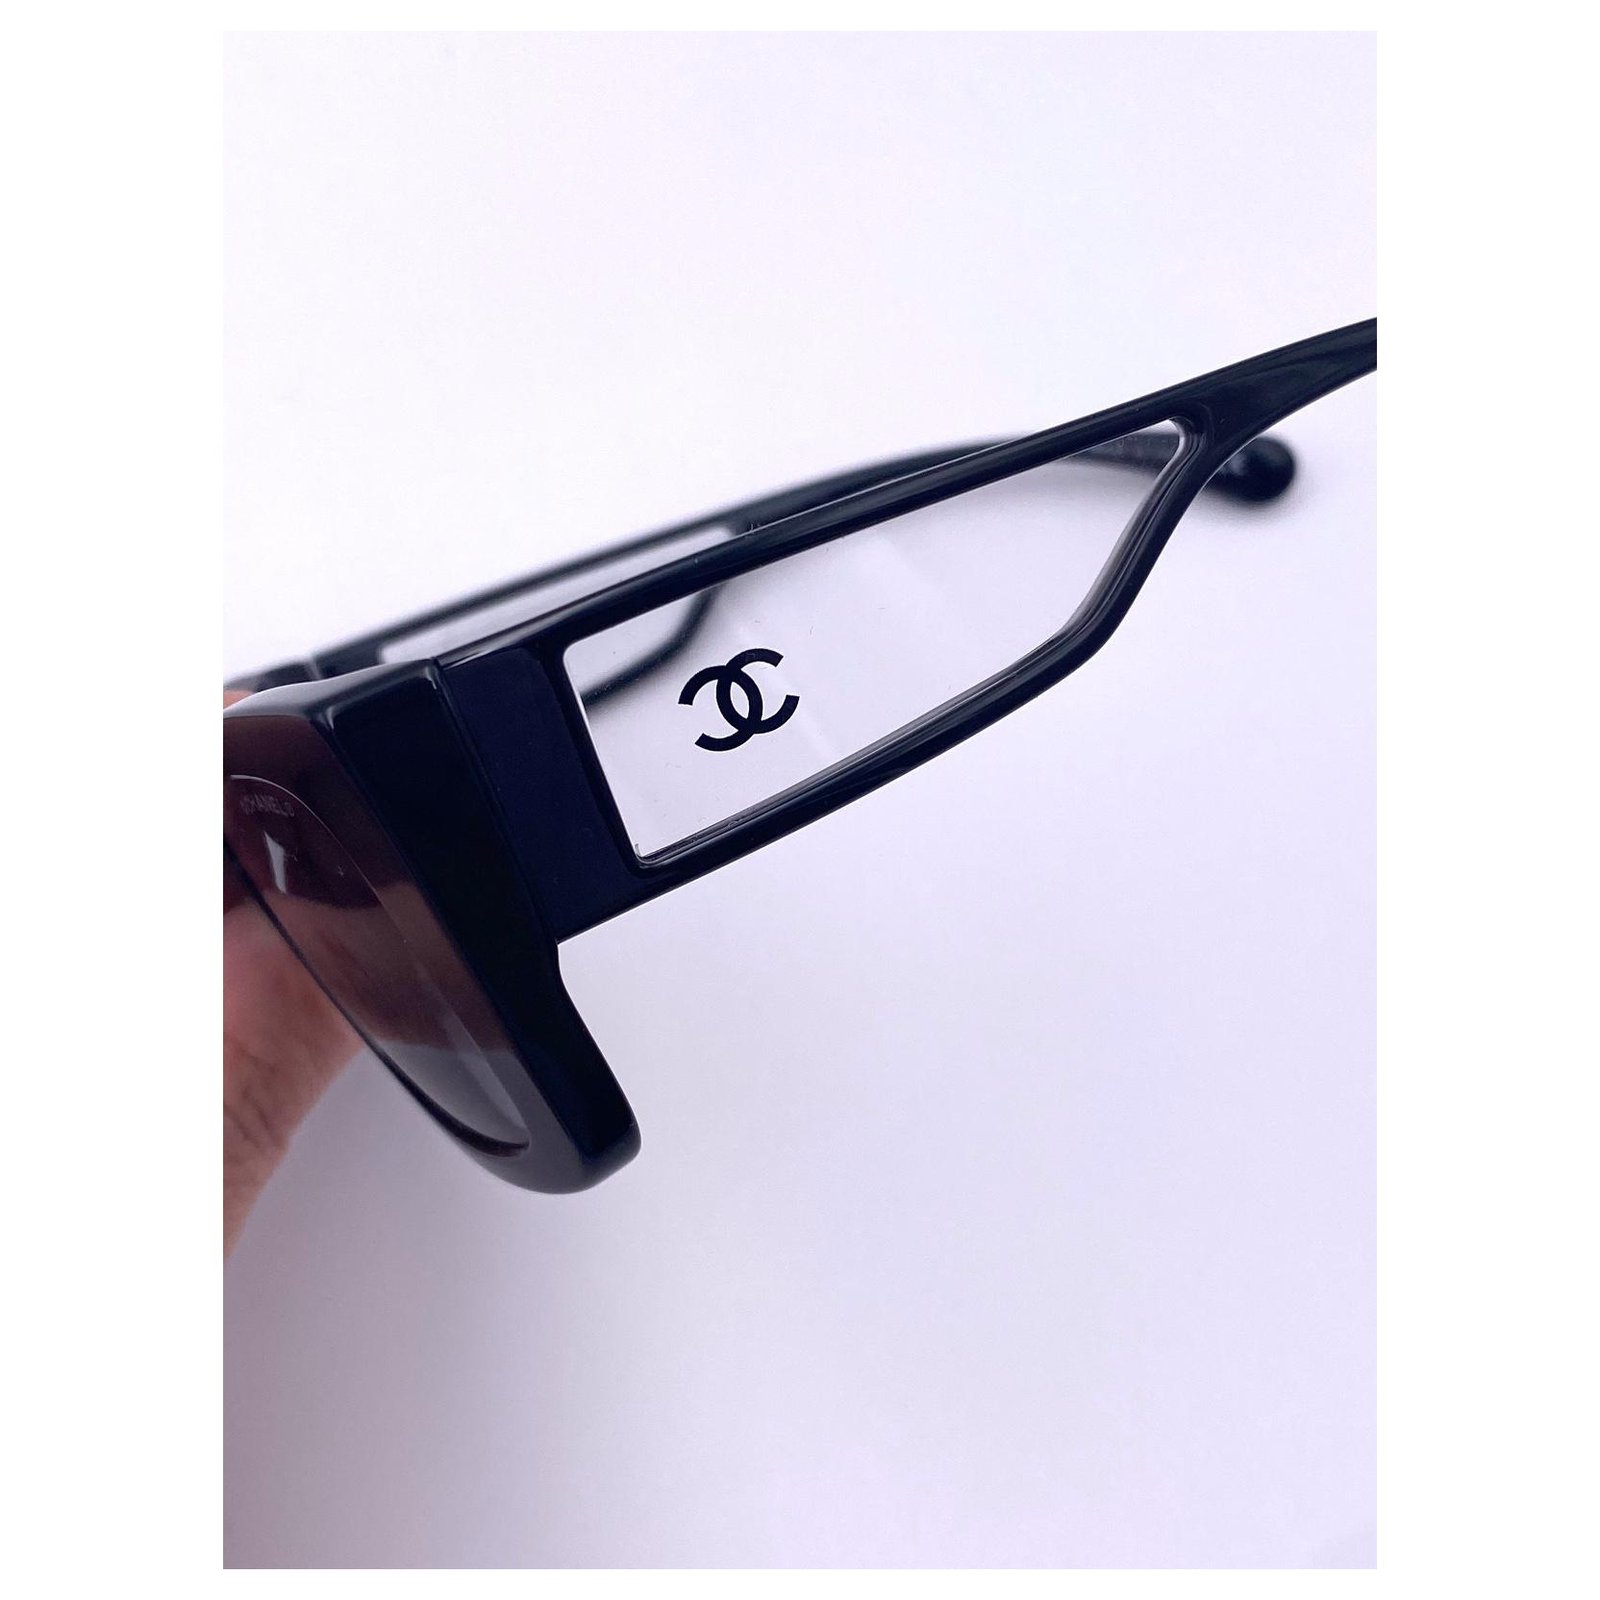 chanel clear side sunglasses